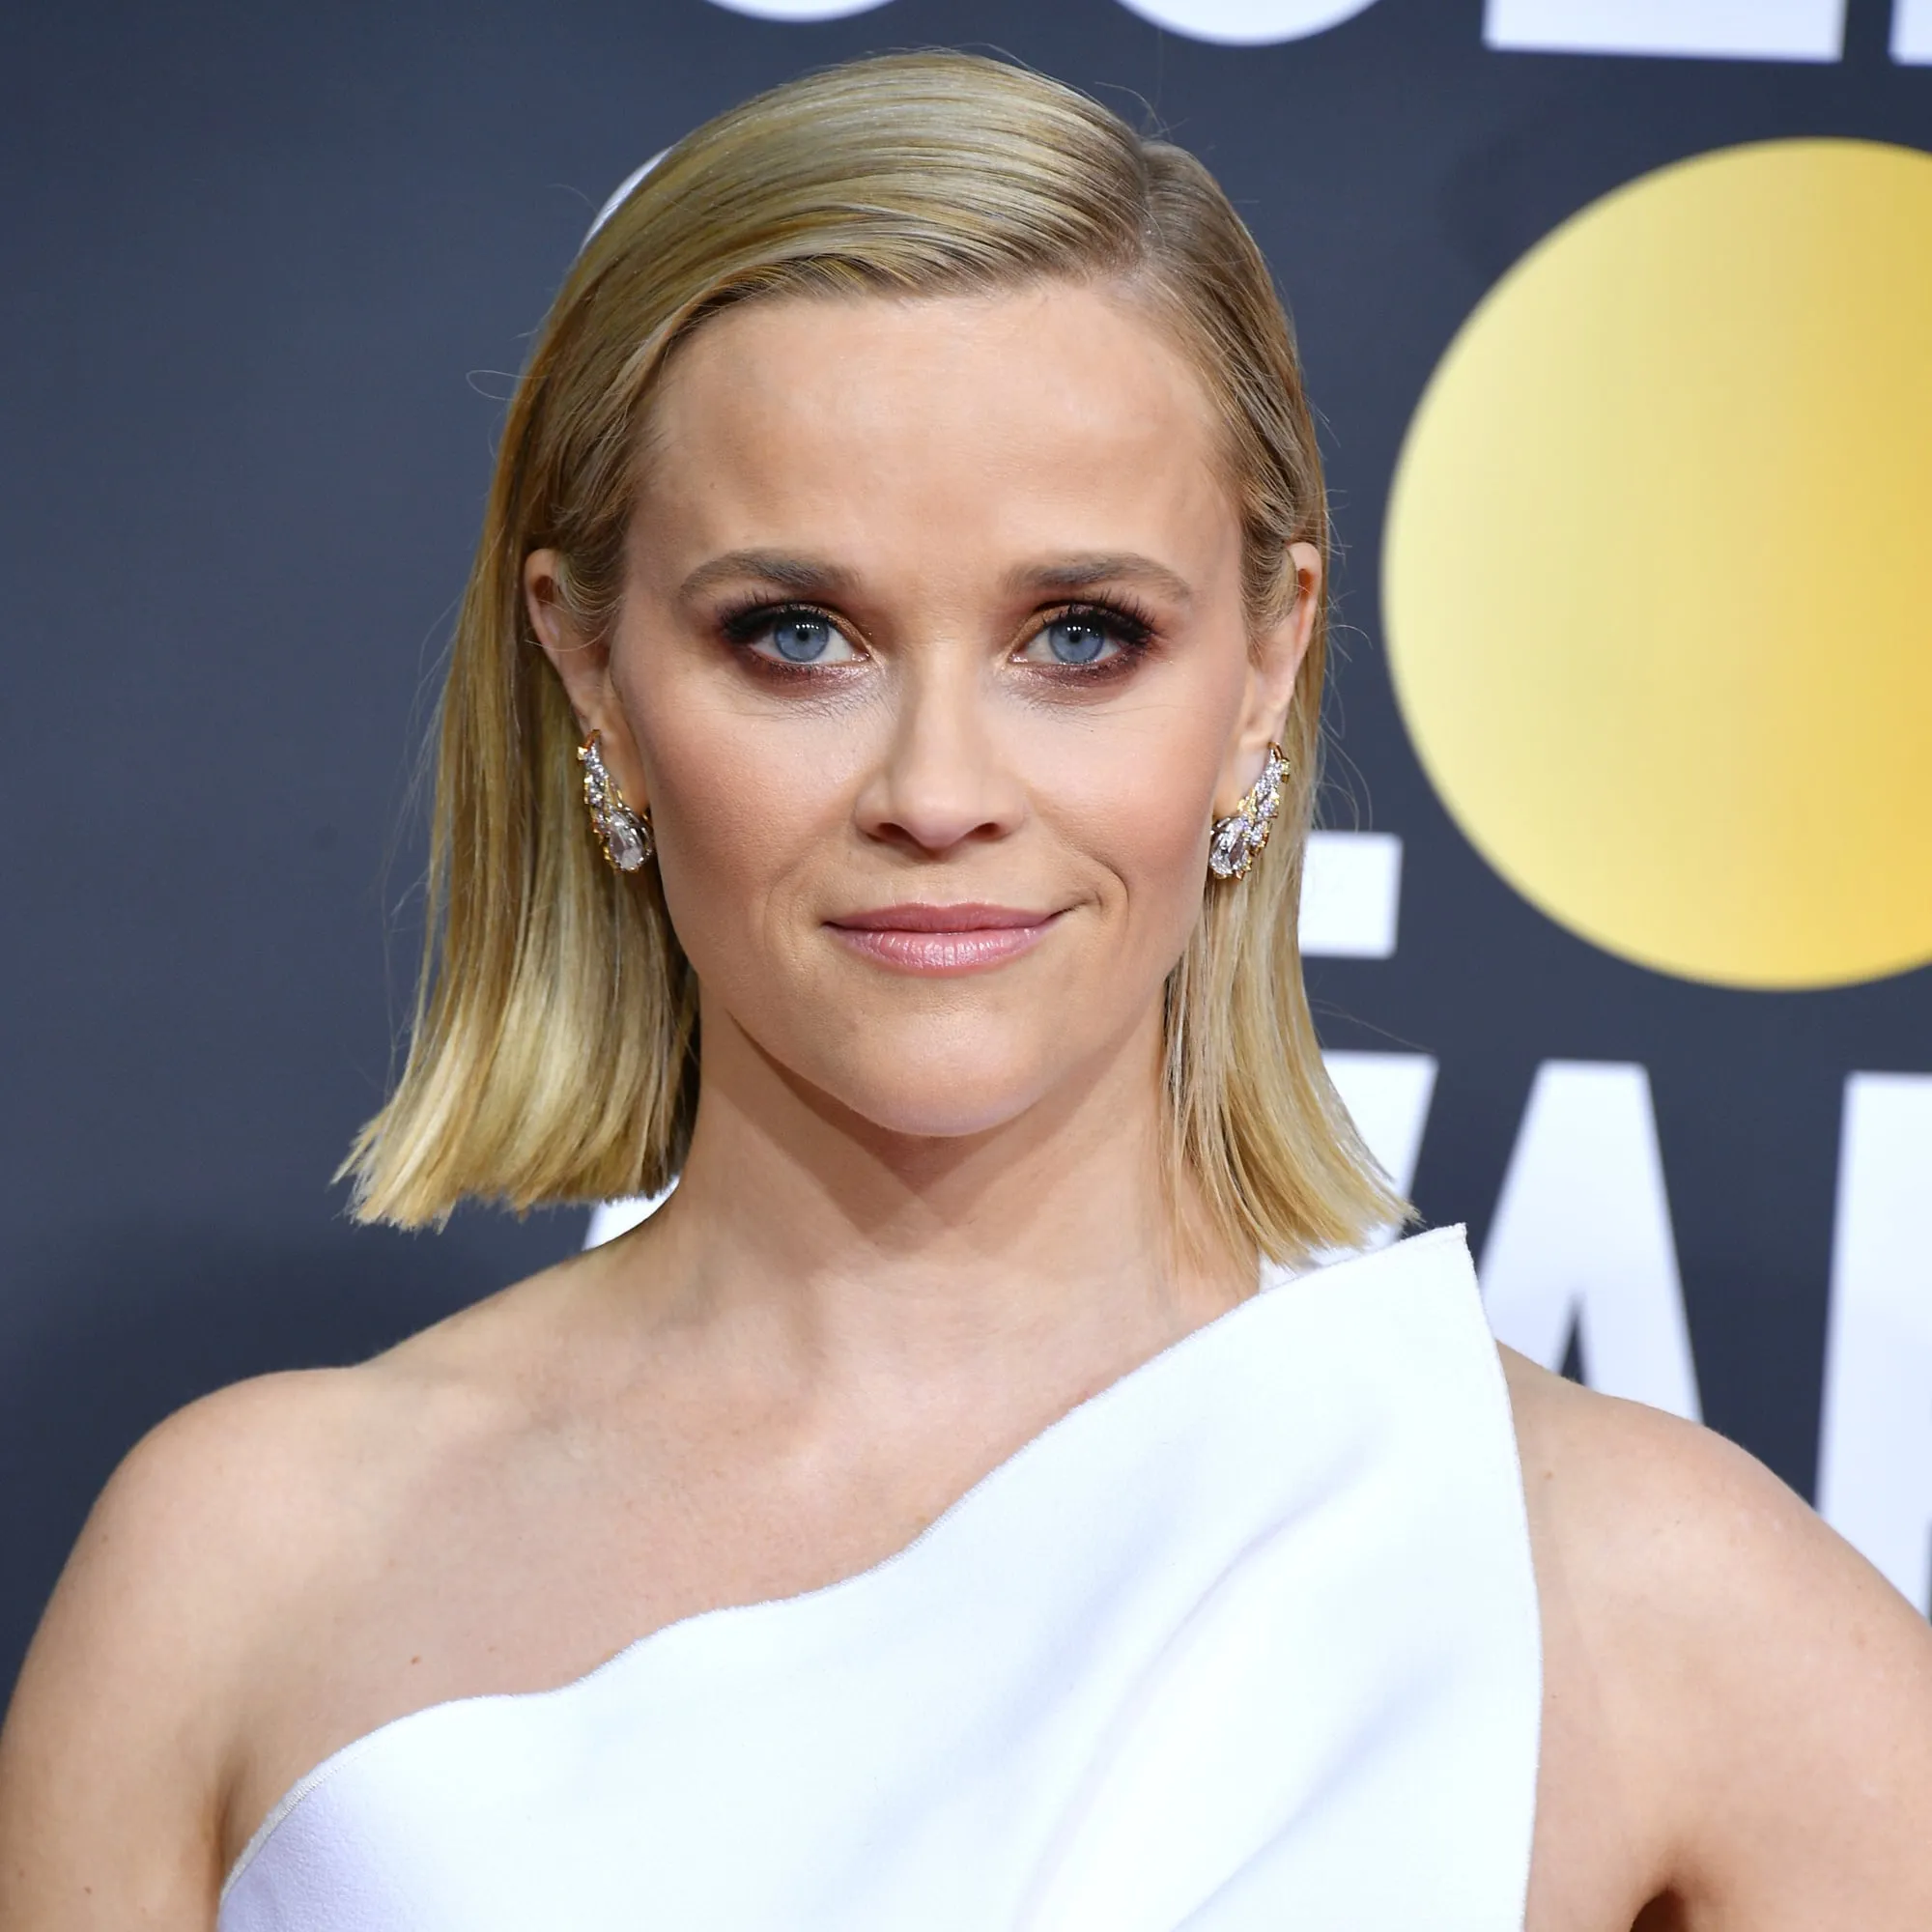 Nghệ sĩ Reese Witherspoon